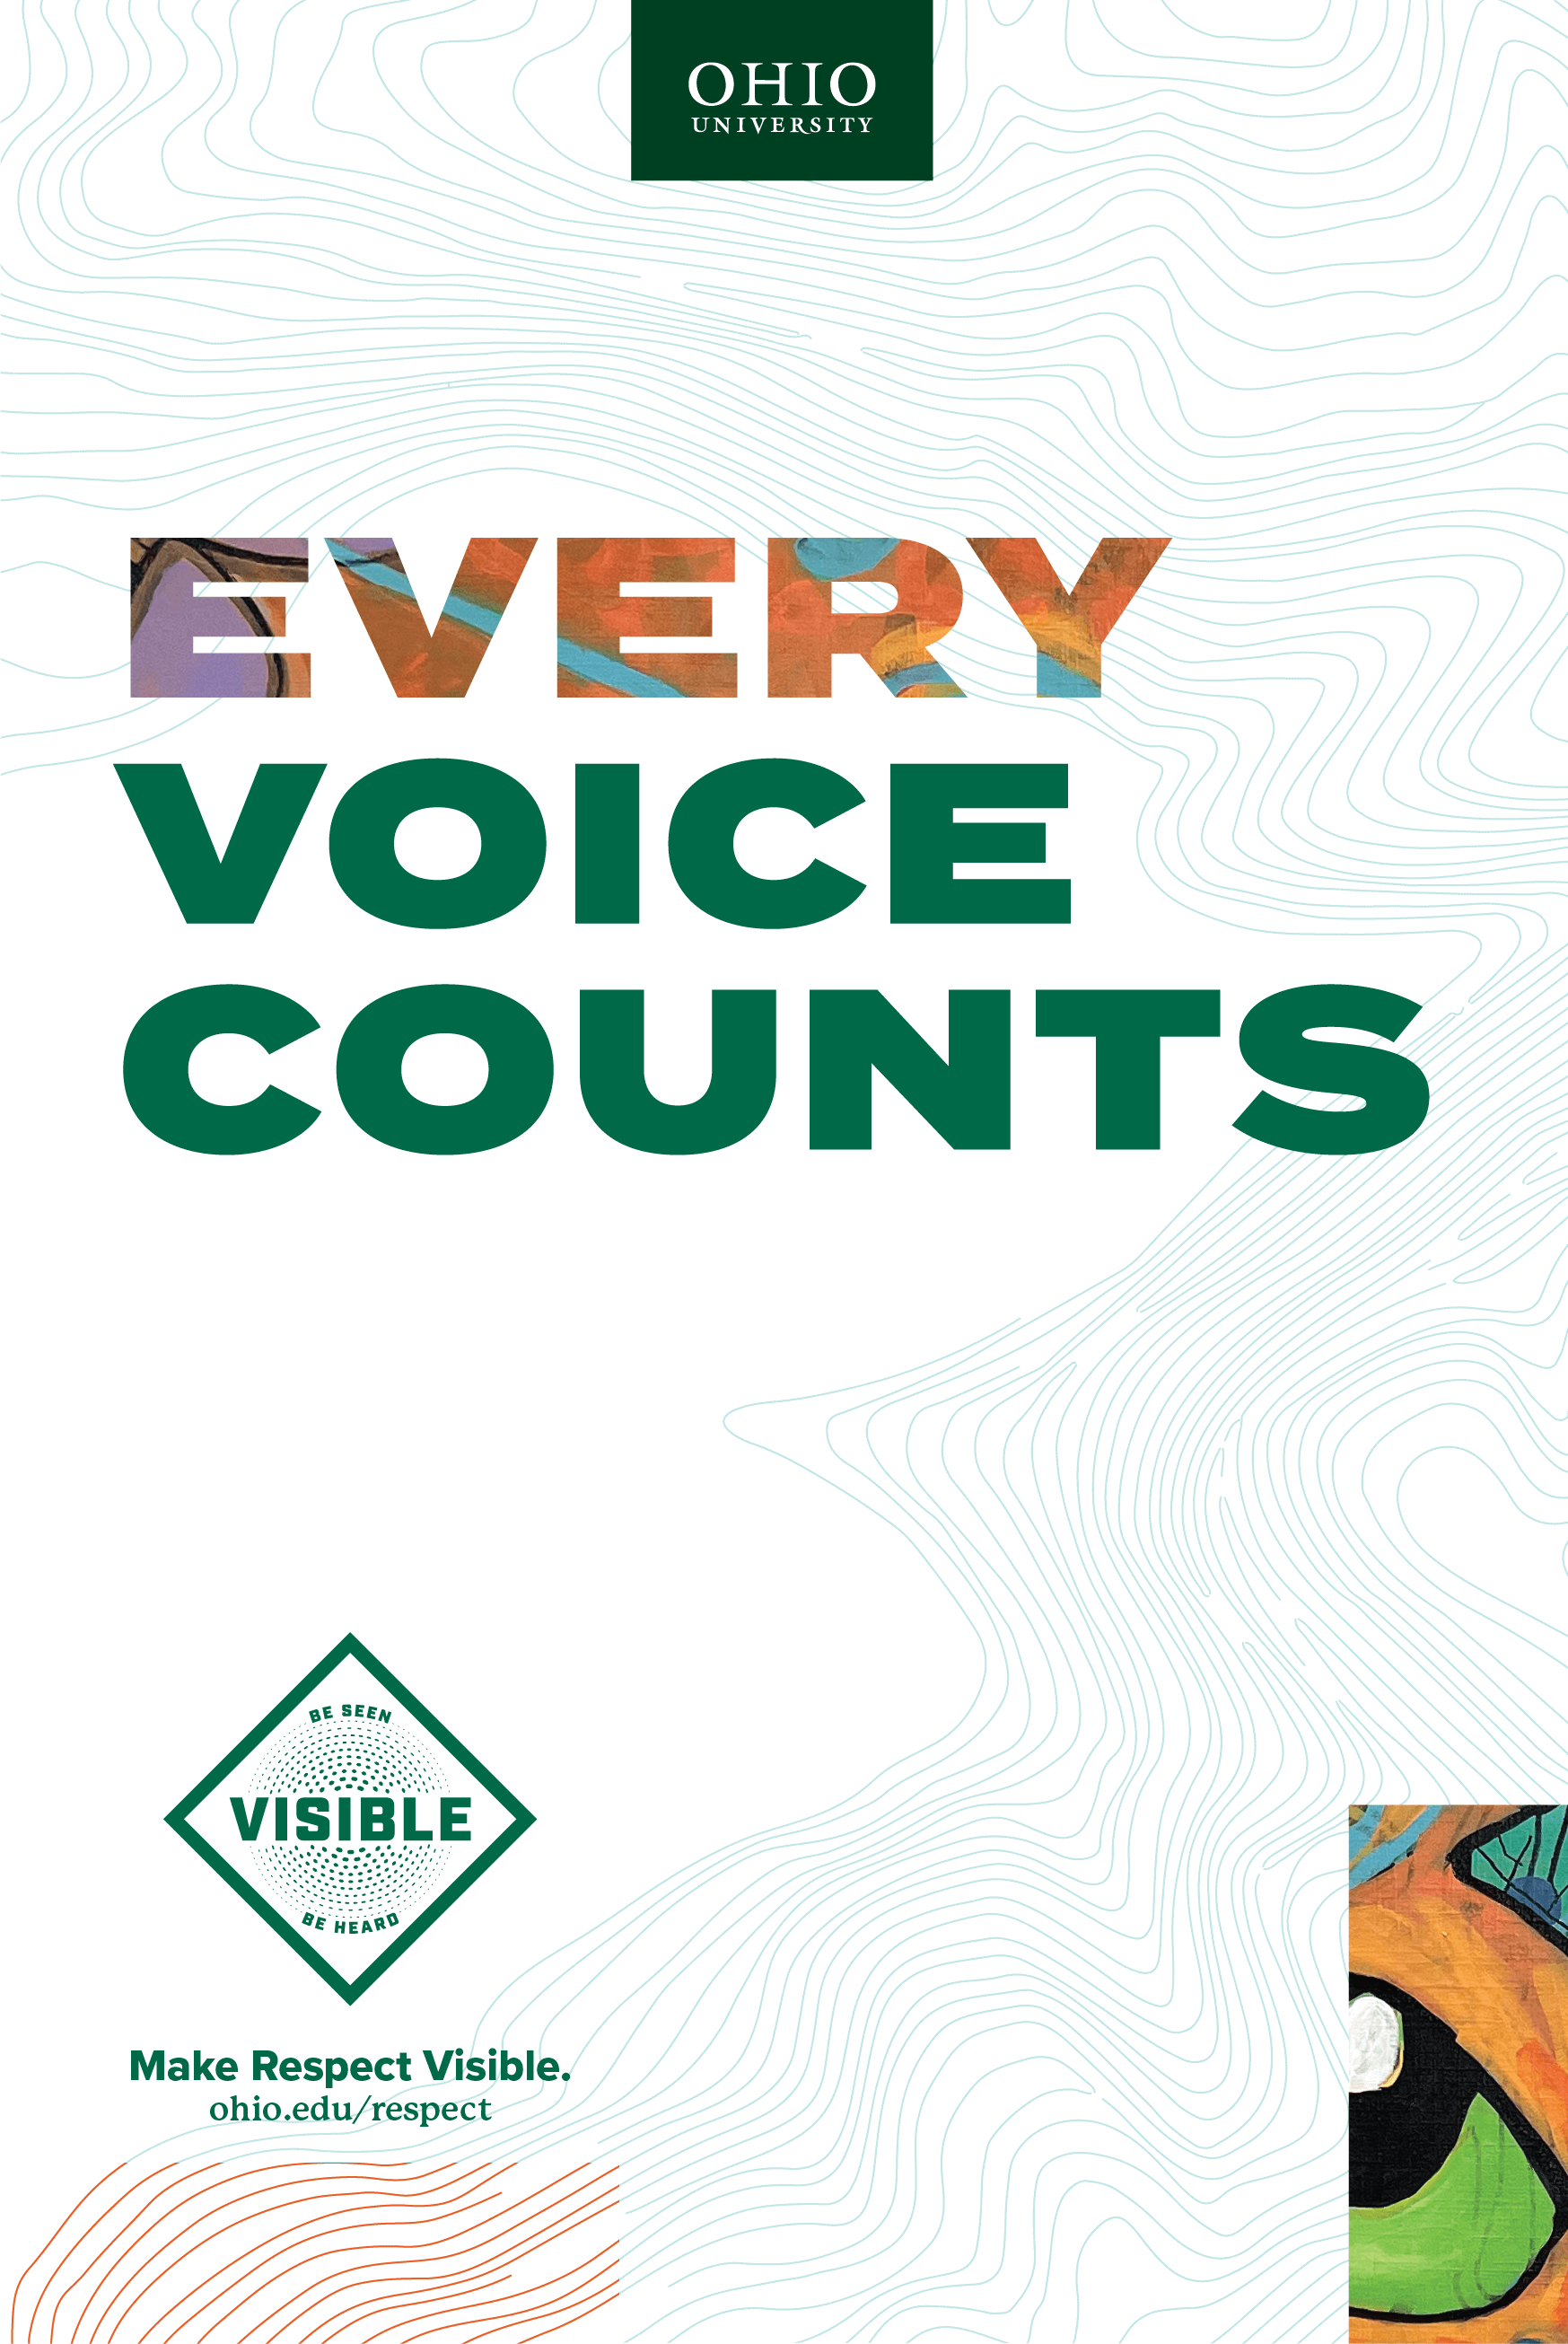 Image of the Every Voice Make Respect Visible poster